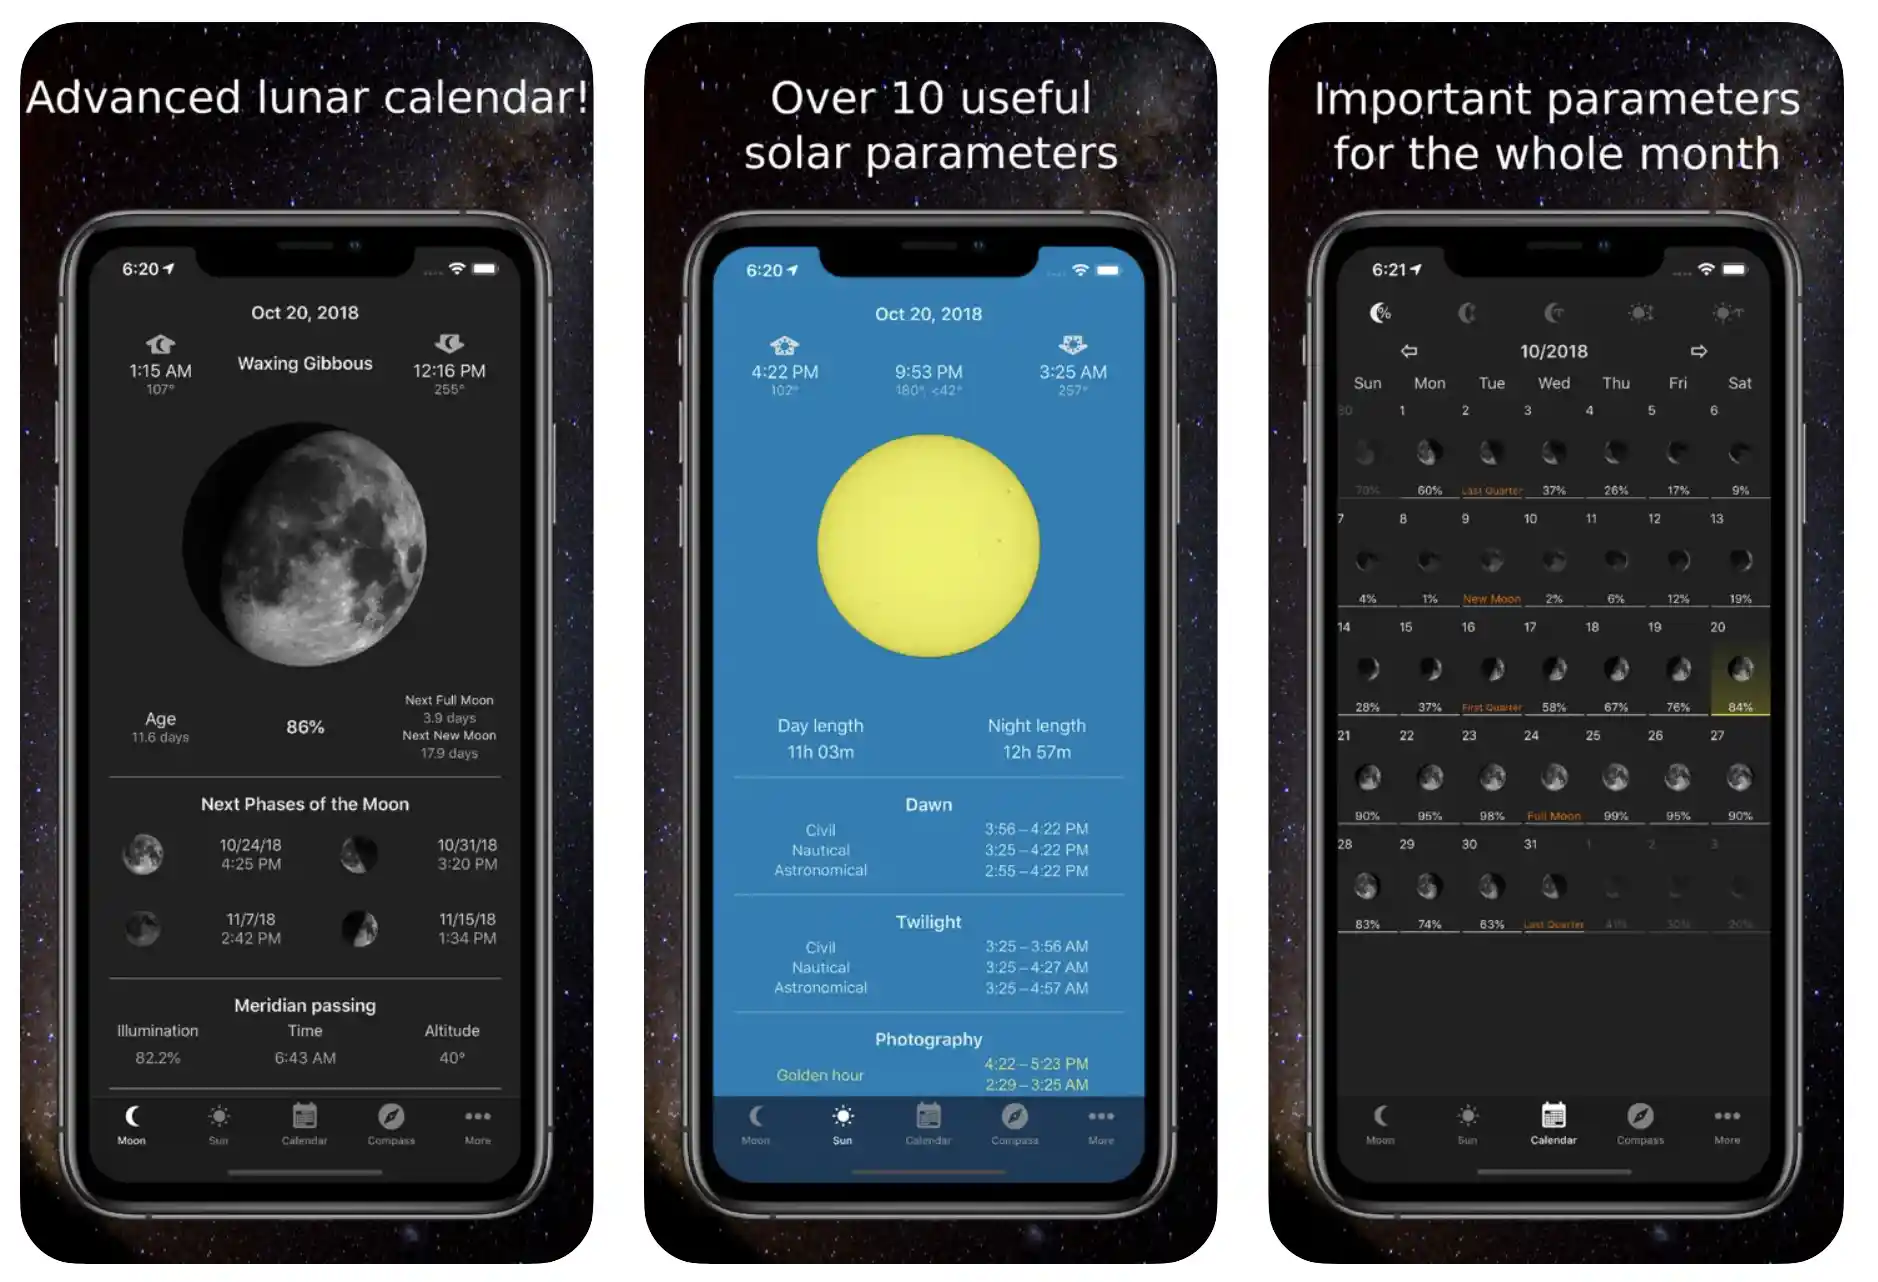 11 Best Moon Phase Apps For Calendar, Cycles and Astrology